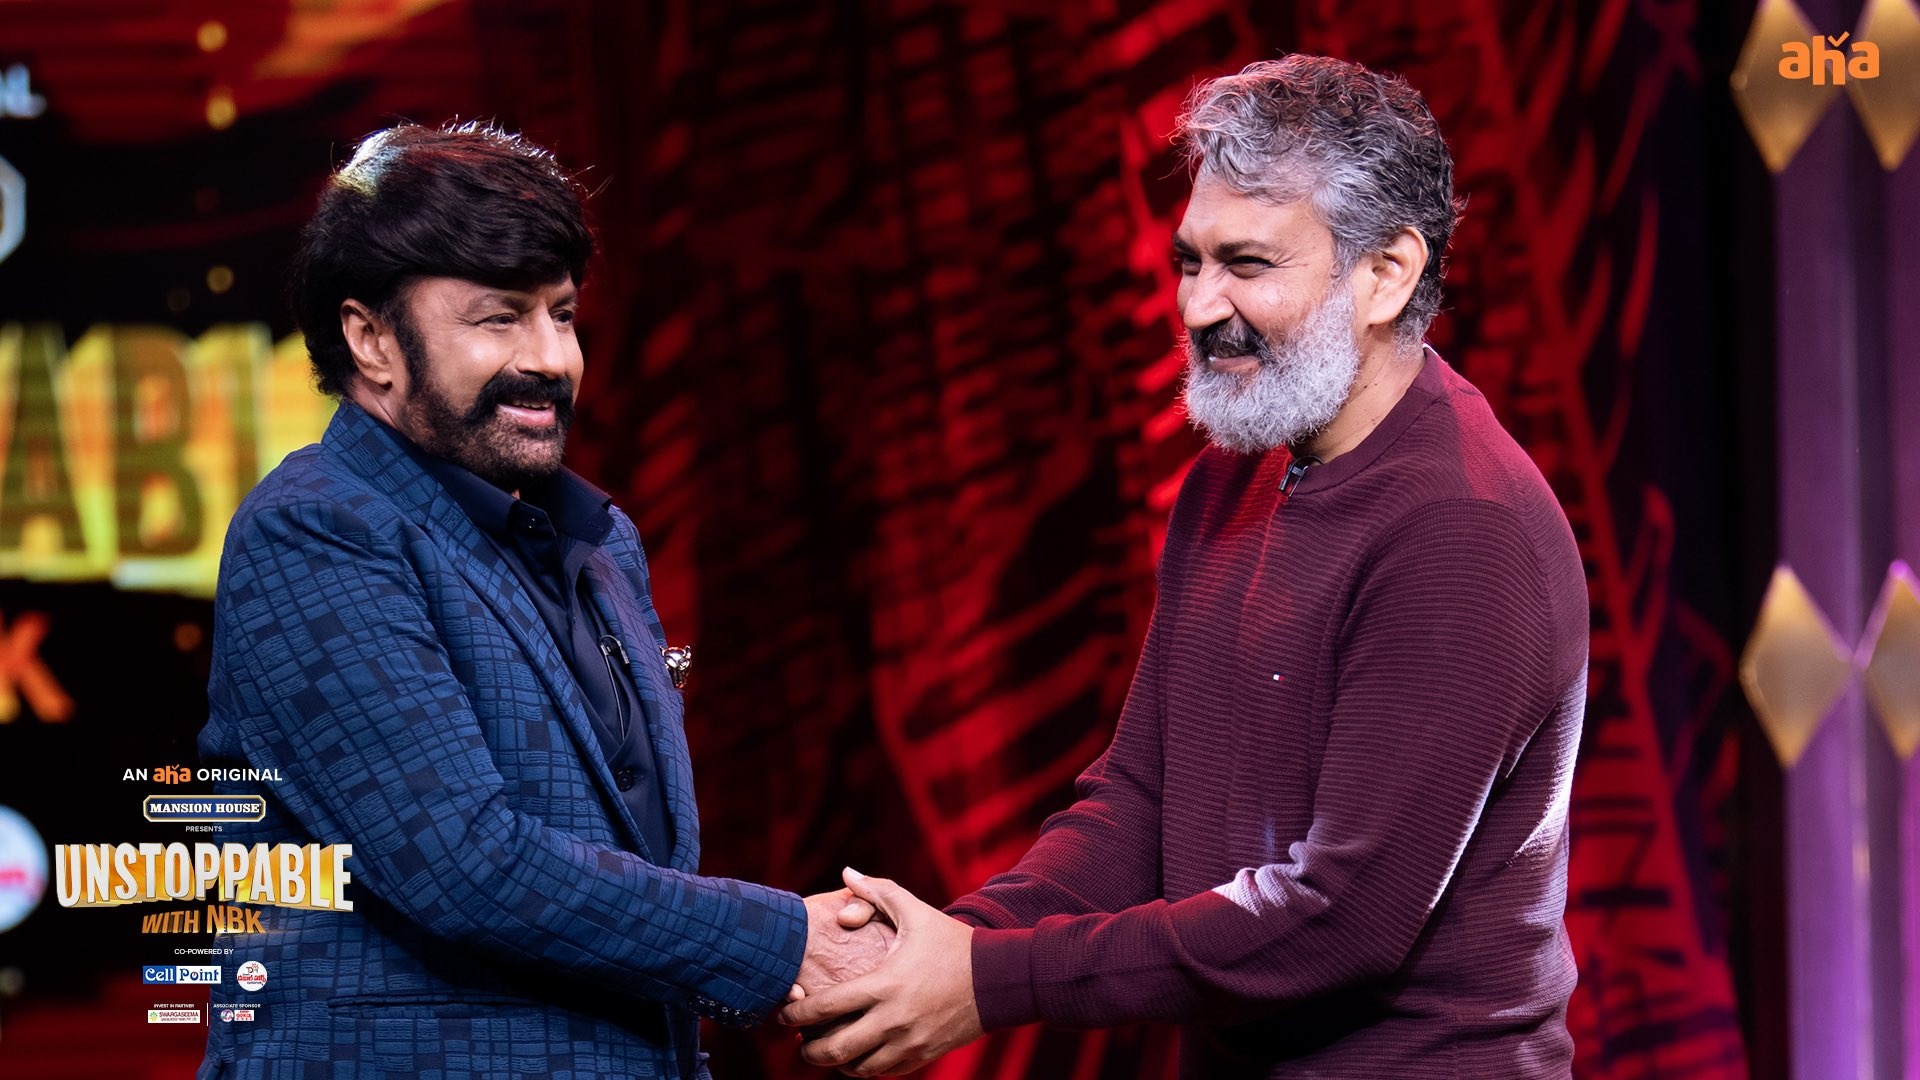 Director Rajamouli in Unstoppable with NBK